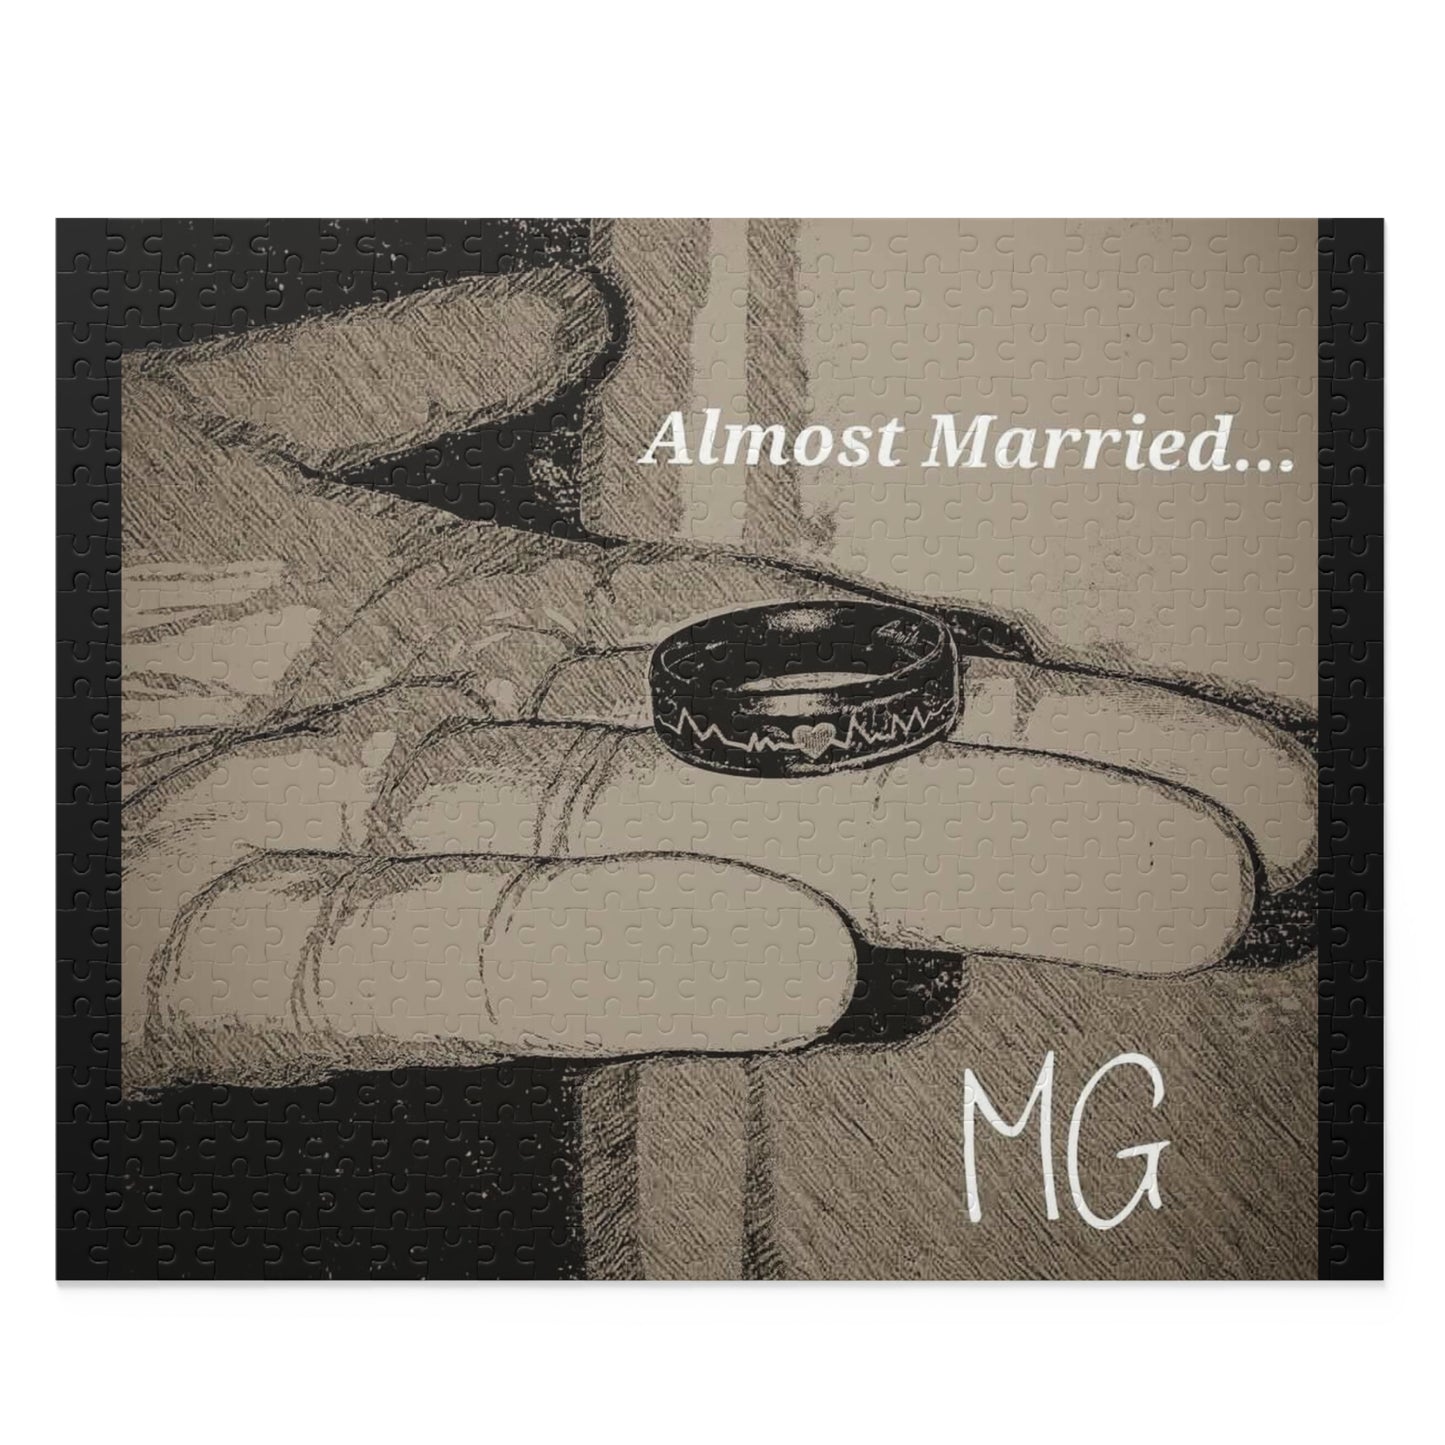 Almost Married MG Puzzle